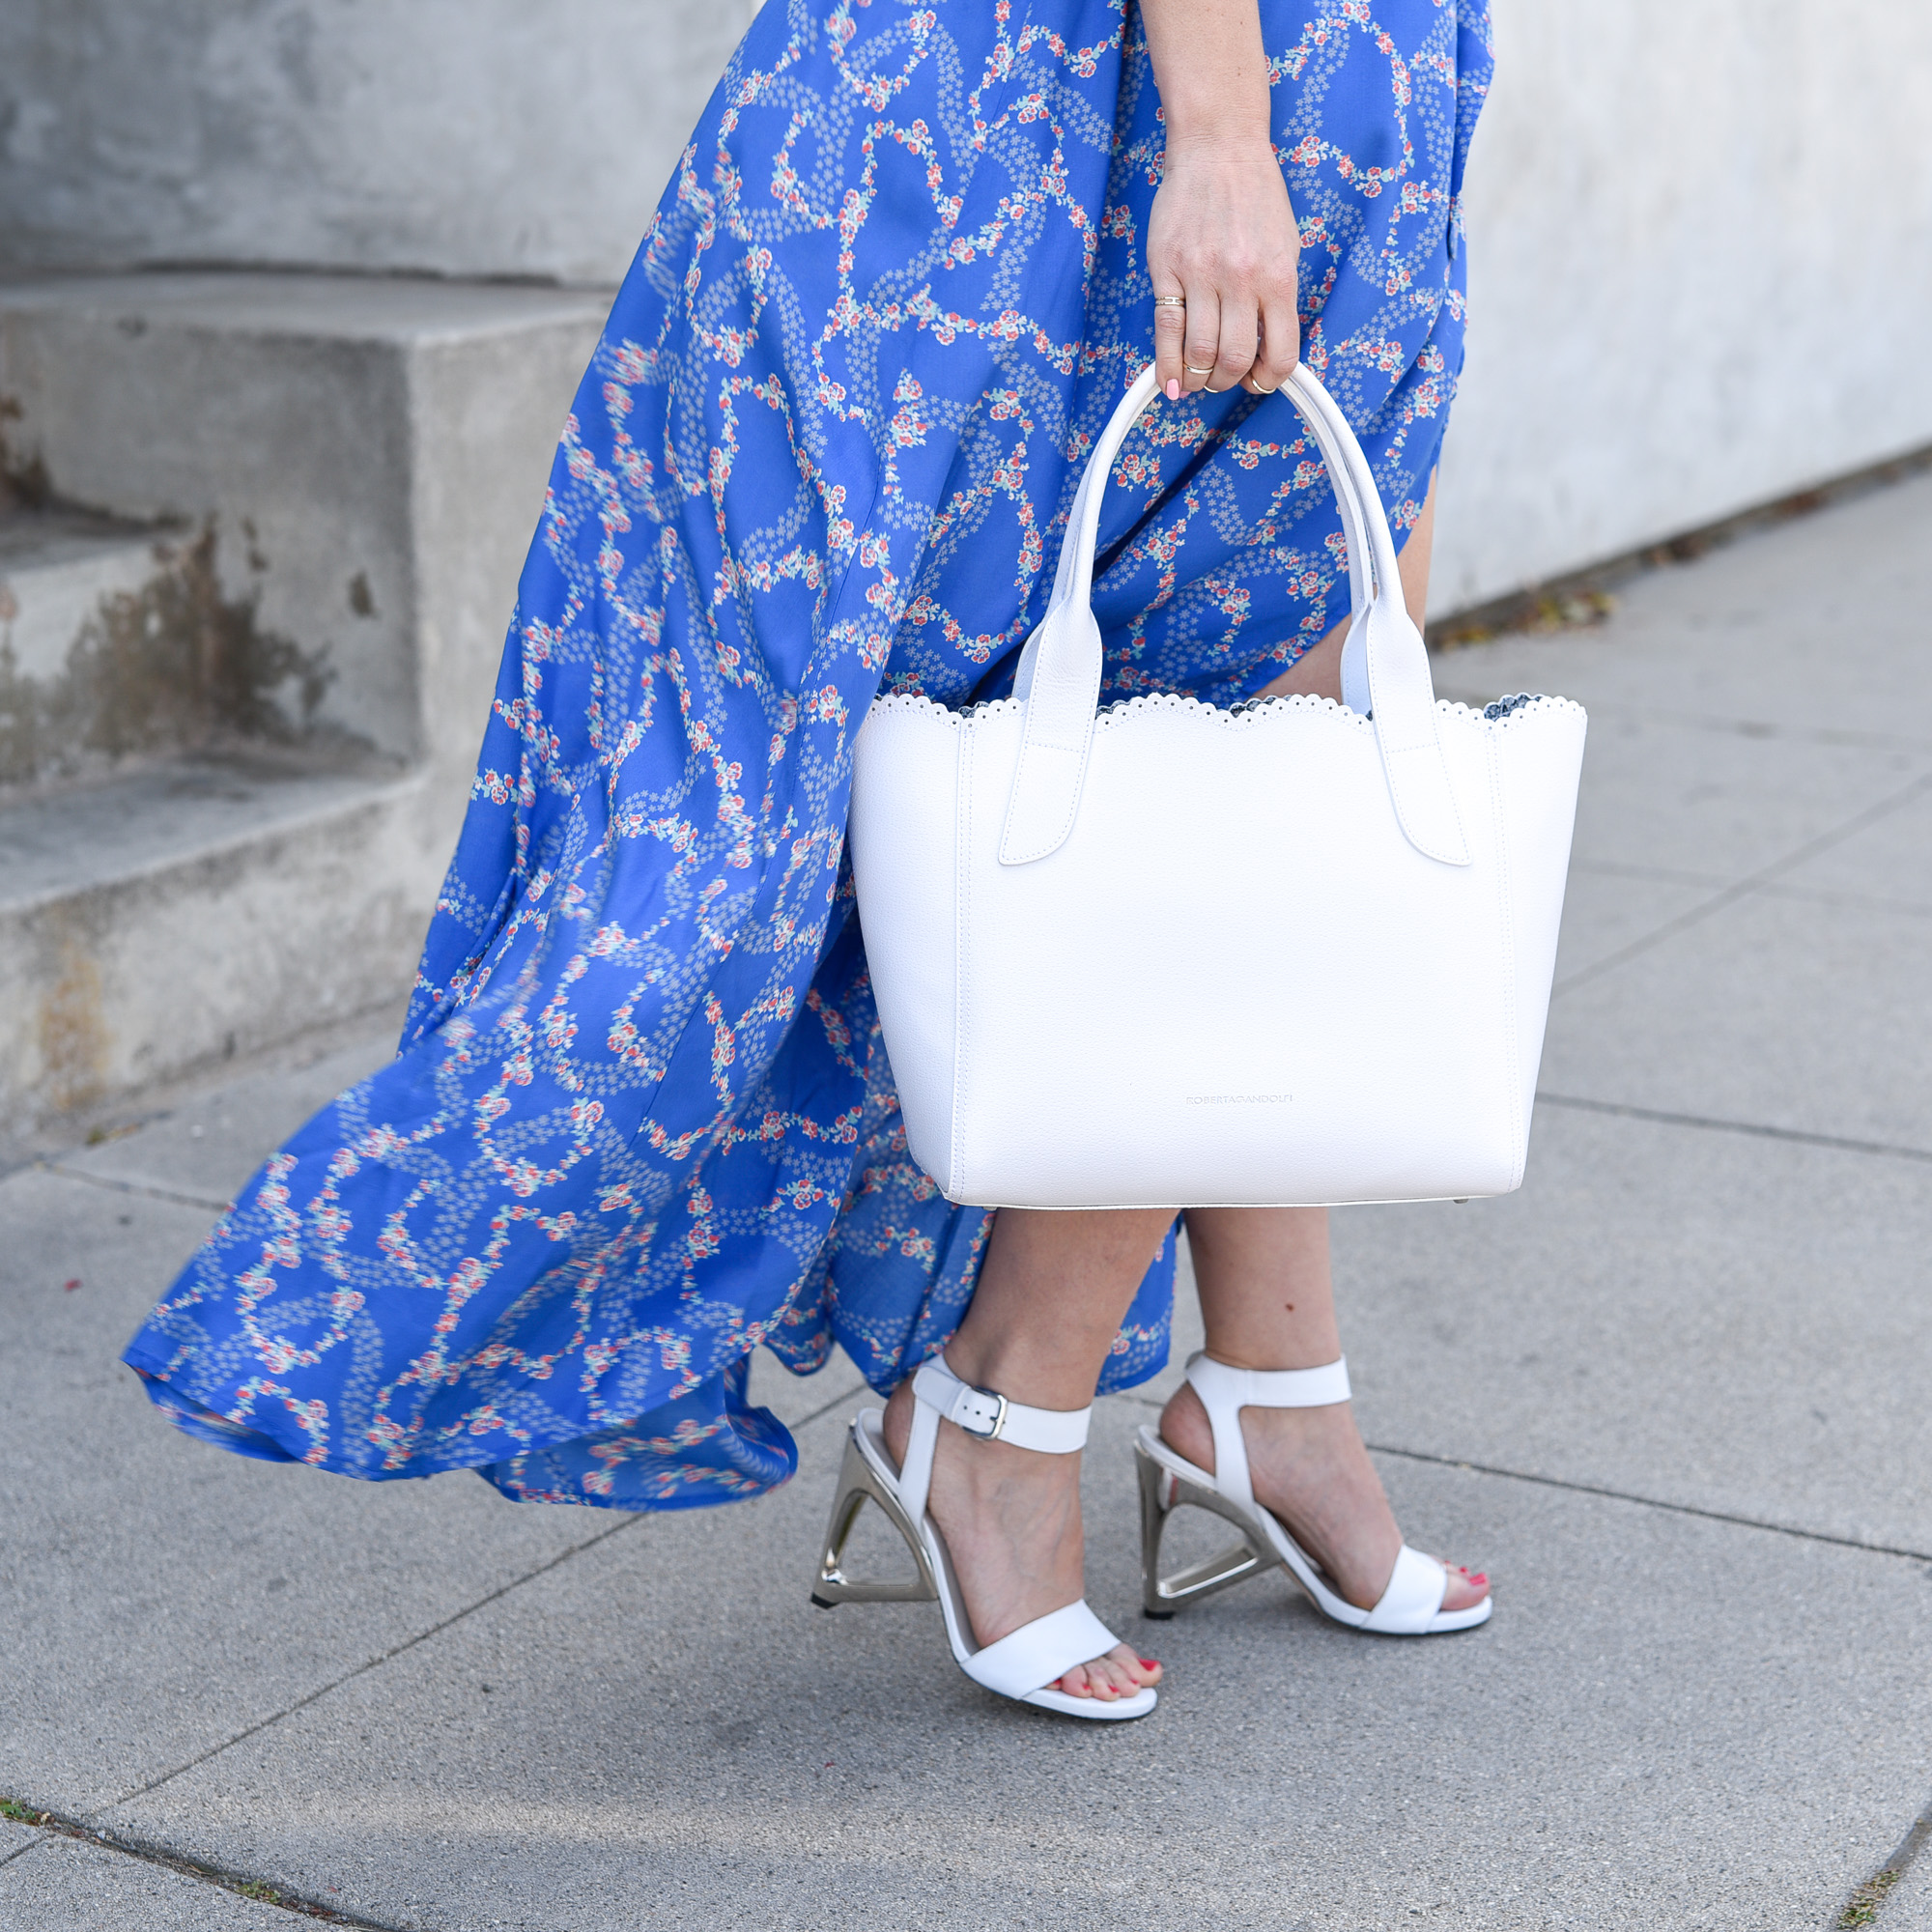 White heels with metallic accents and a matching purse. 